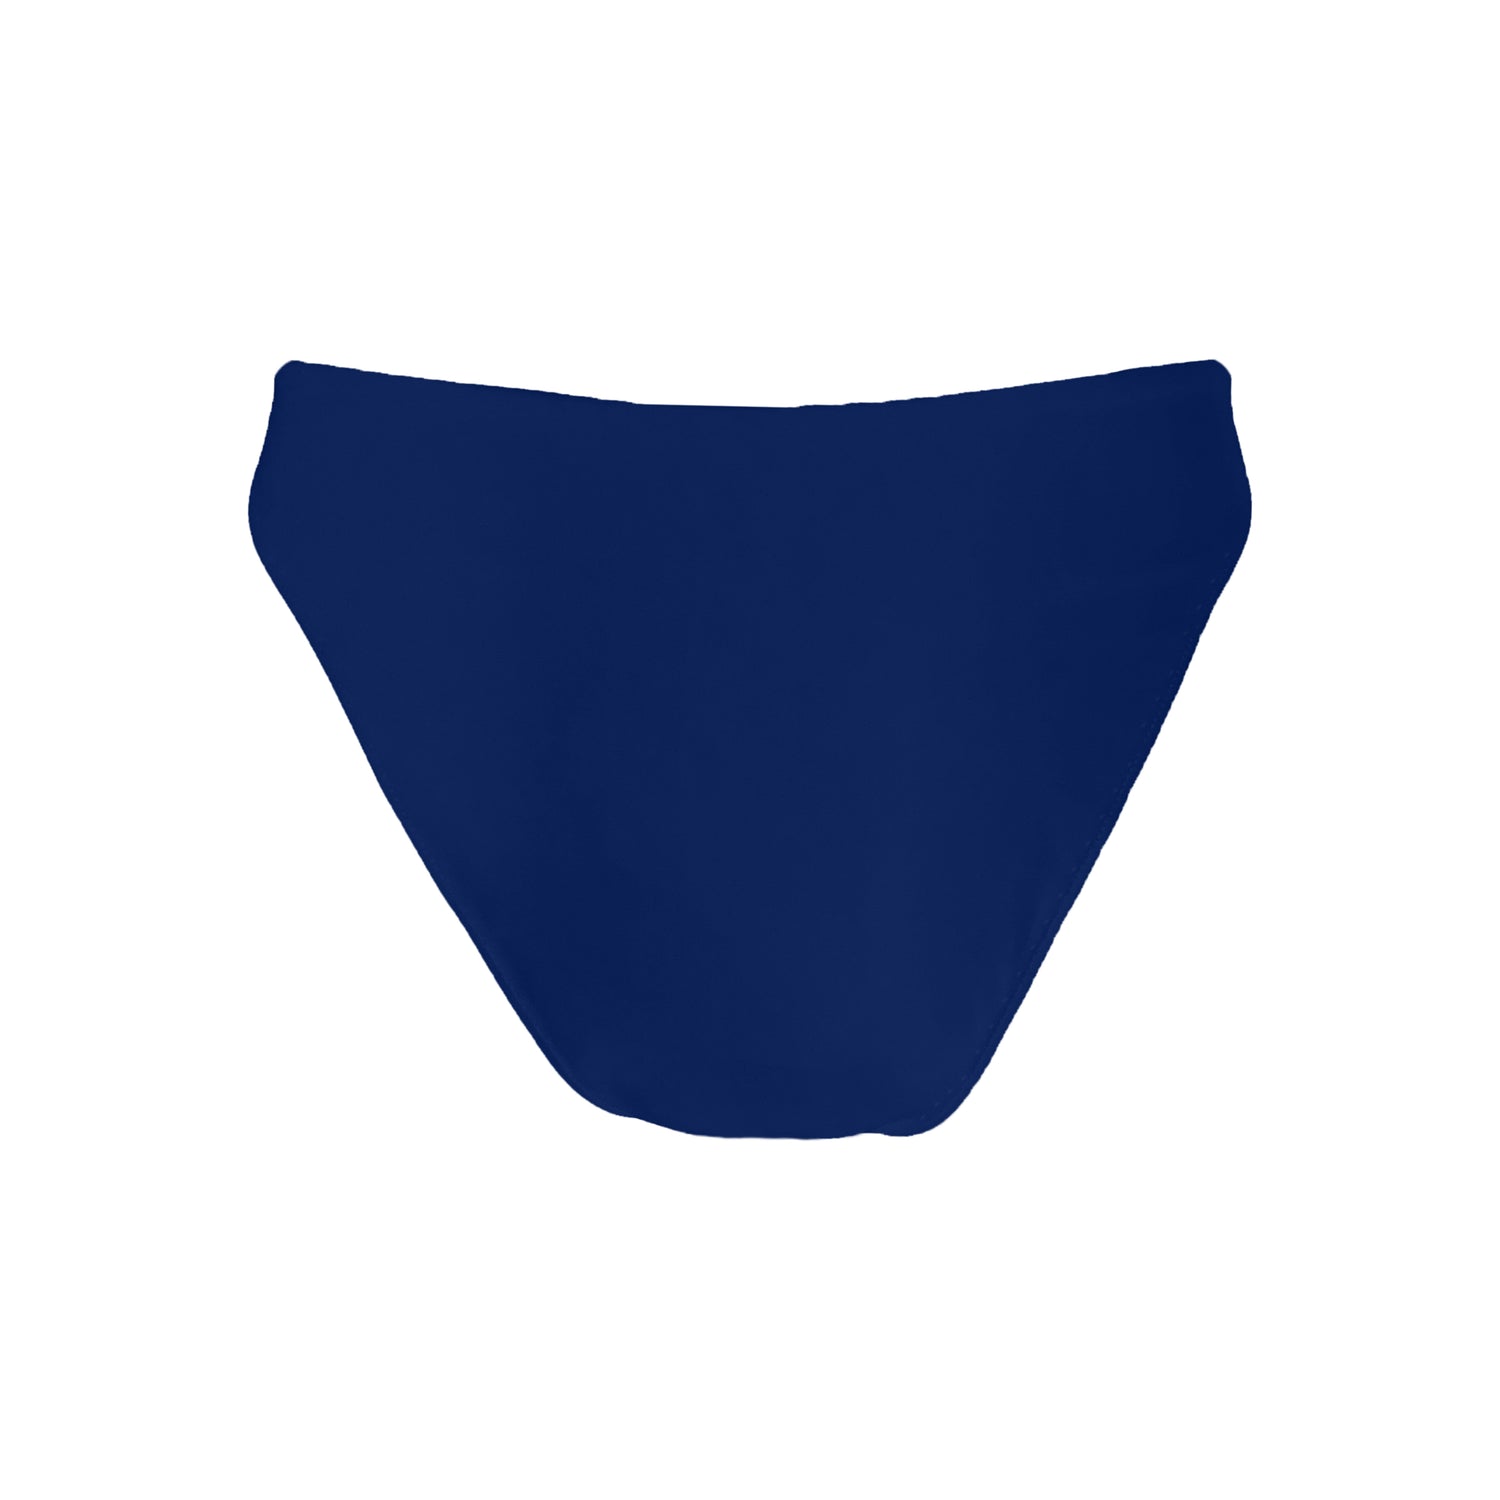 Back view of v shape midnight navy v shape mid rise bikini bottom with asymmetric seam detail, high cut sides and cheeky bum coverage.